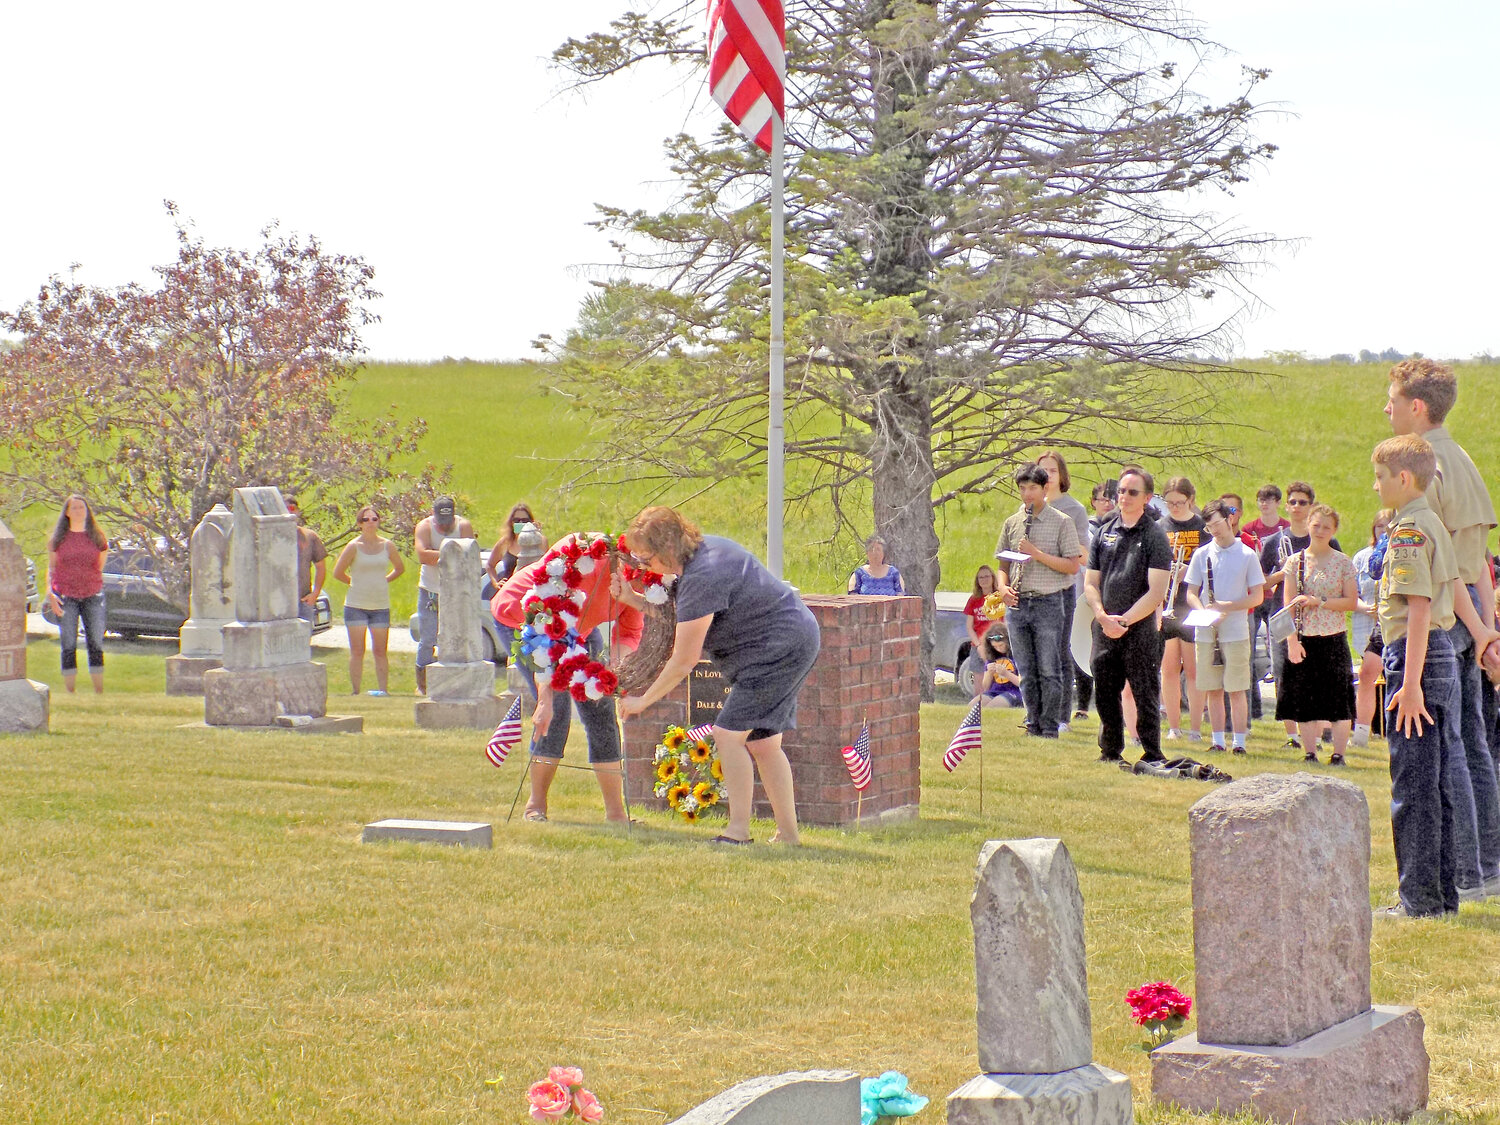 The AmVets Post 107 Ladies Auxiliary places a wreath in memory of service members lost in war during the Memorial Day ceremony at Richmond Catholic Cemetery.